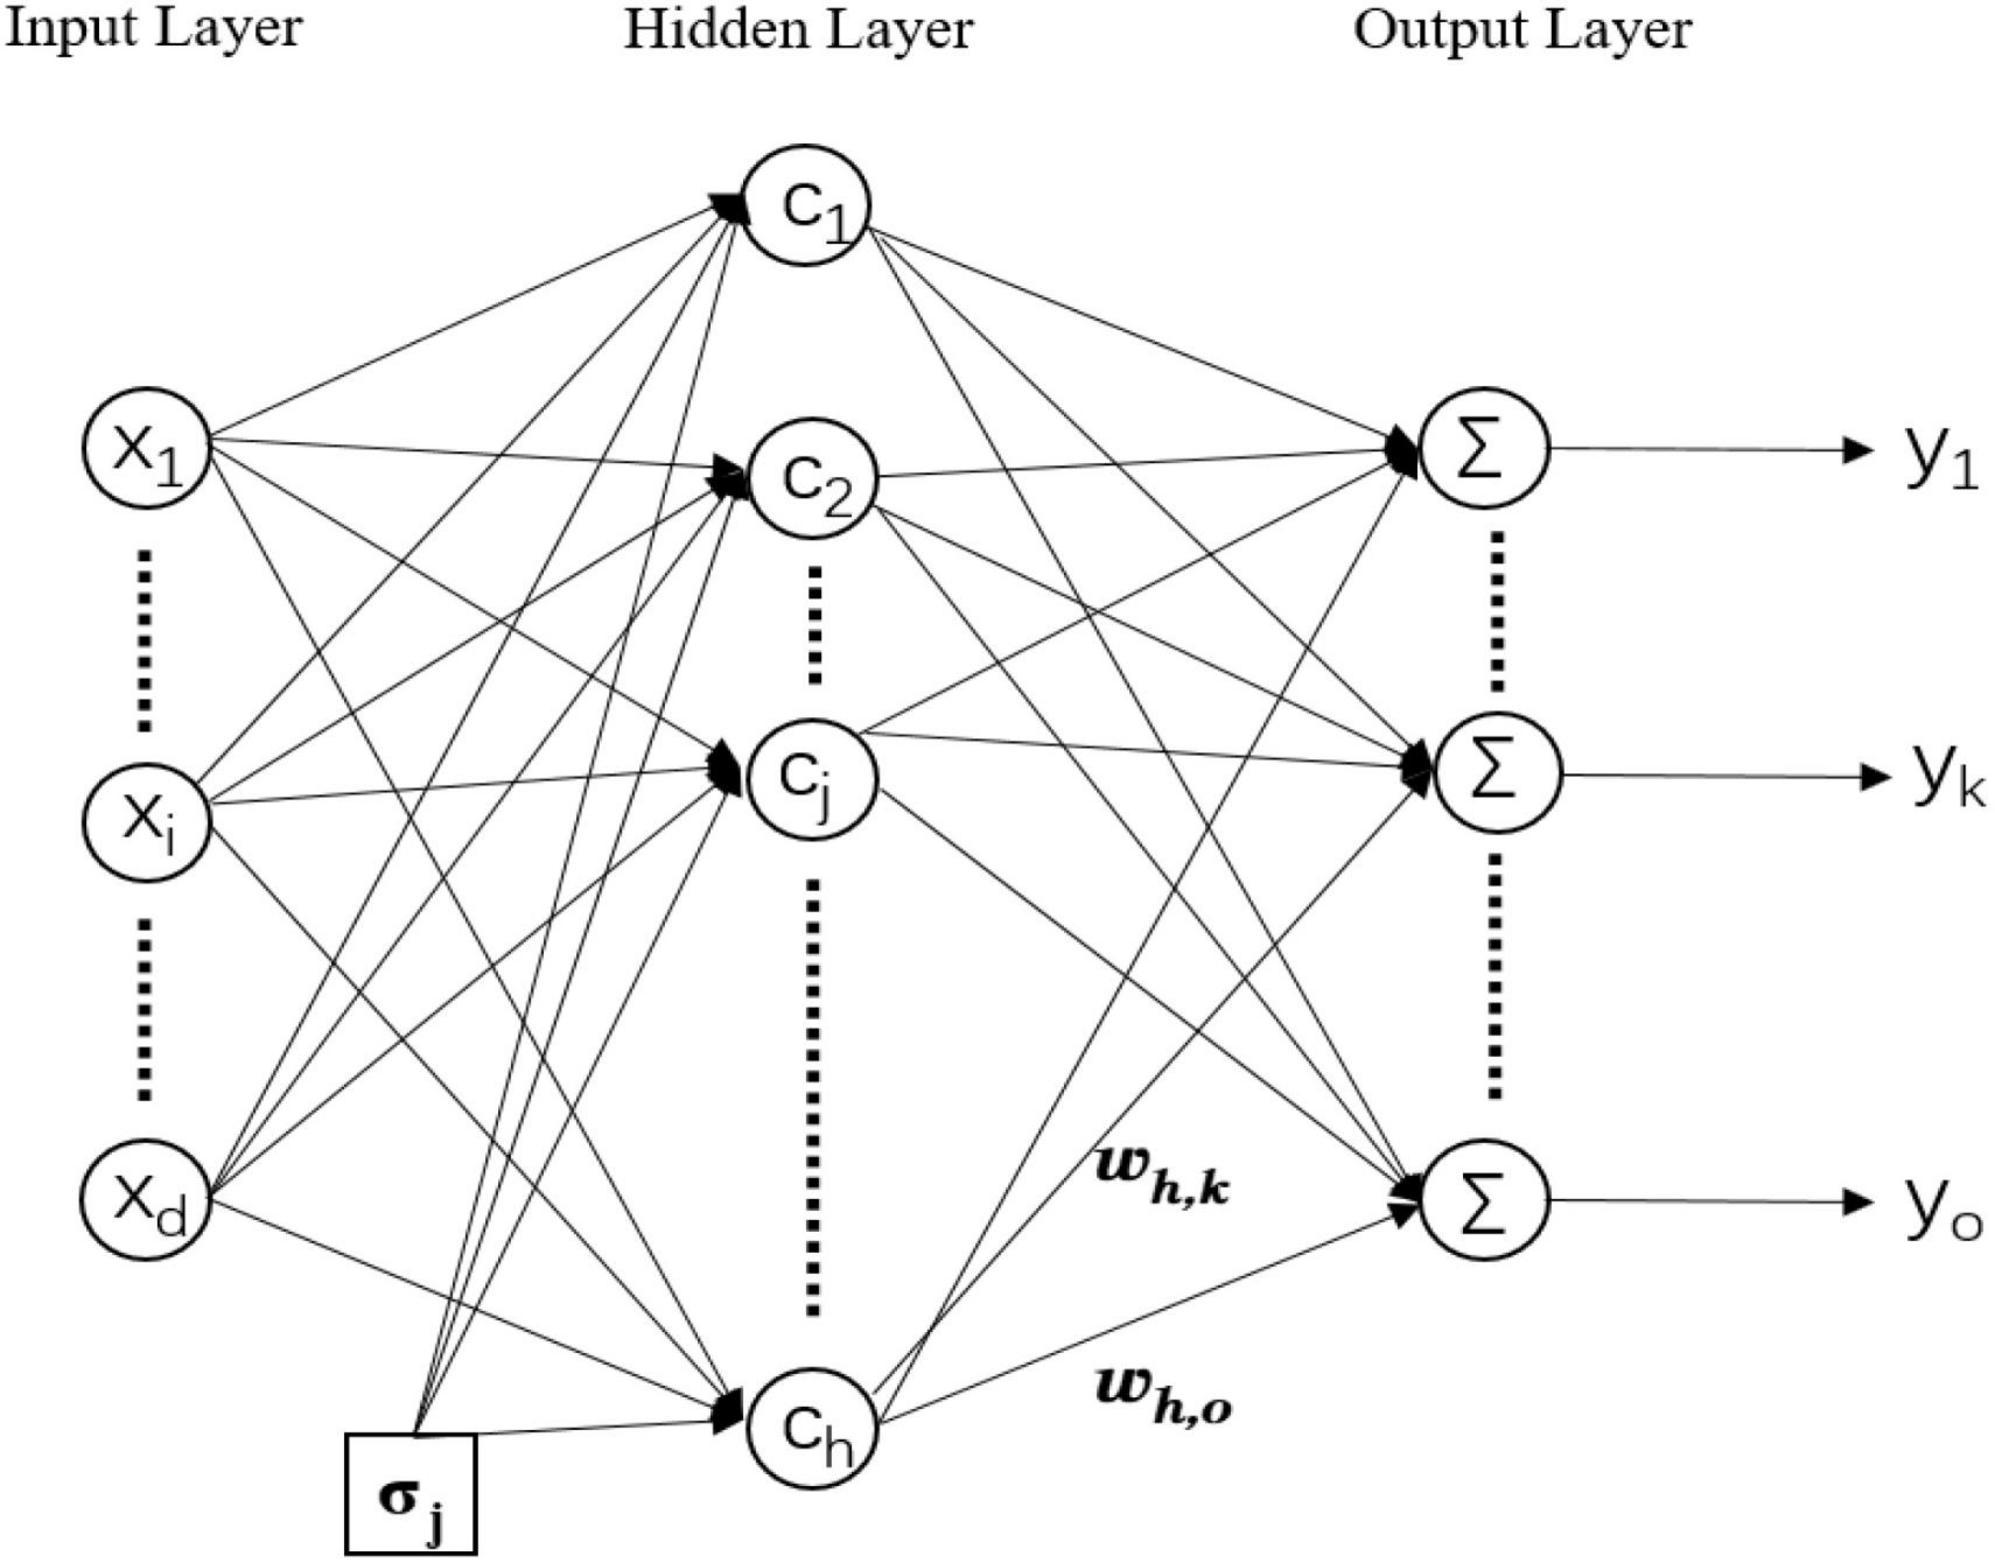 An RBF neural network based on improved black widow optimization algorithm for classification and regression problems